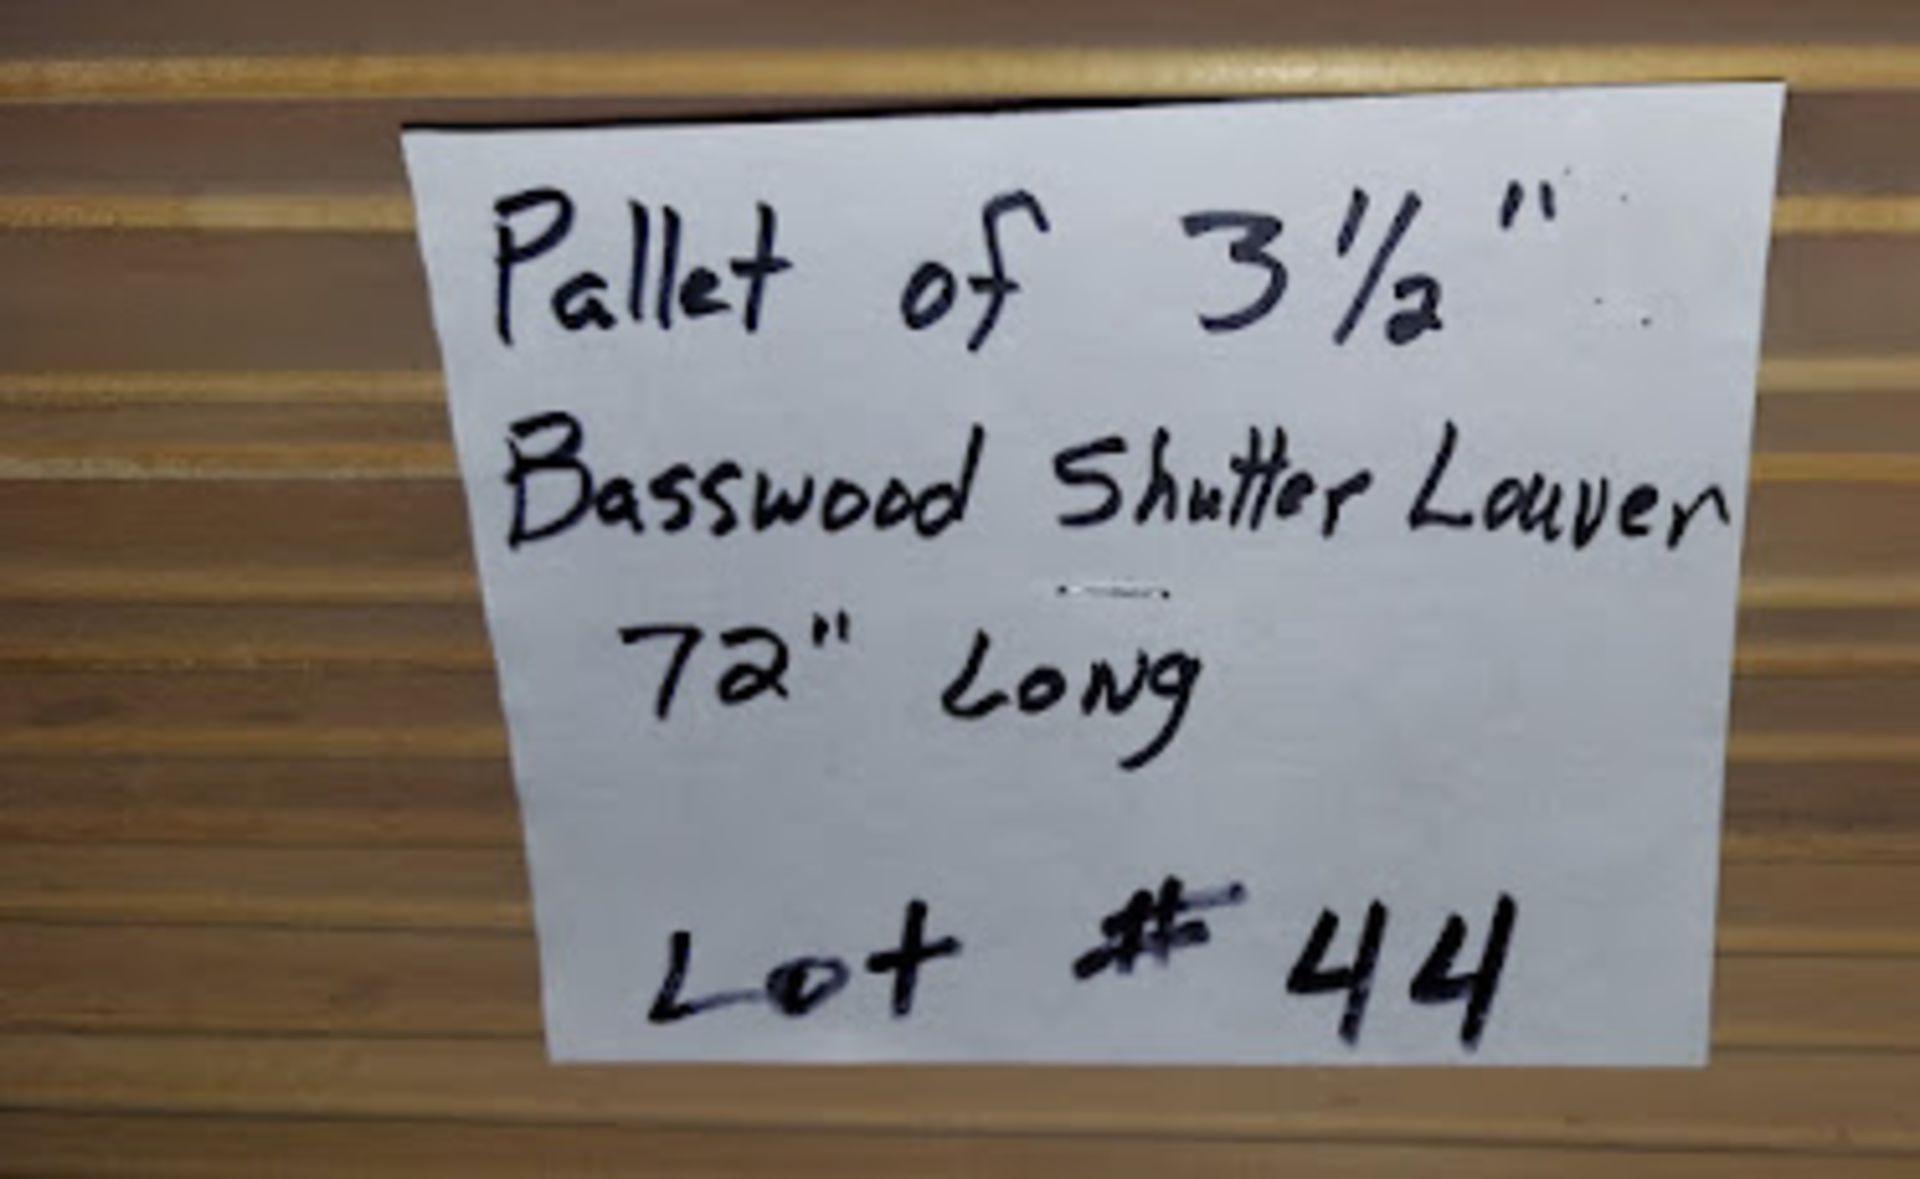 Pallet of 3 1/2" Basswod Shutter Louver 72" Long - Image 5 of 5